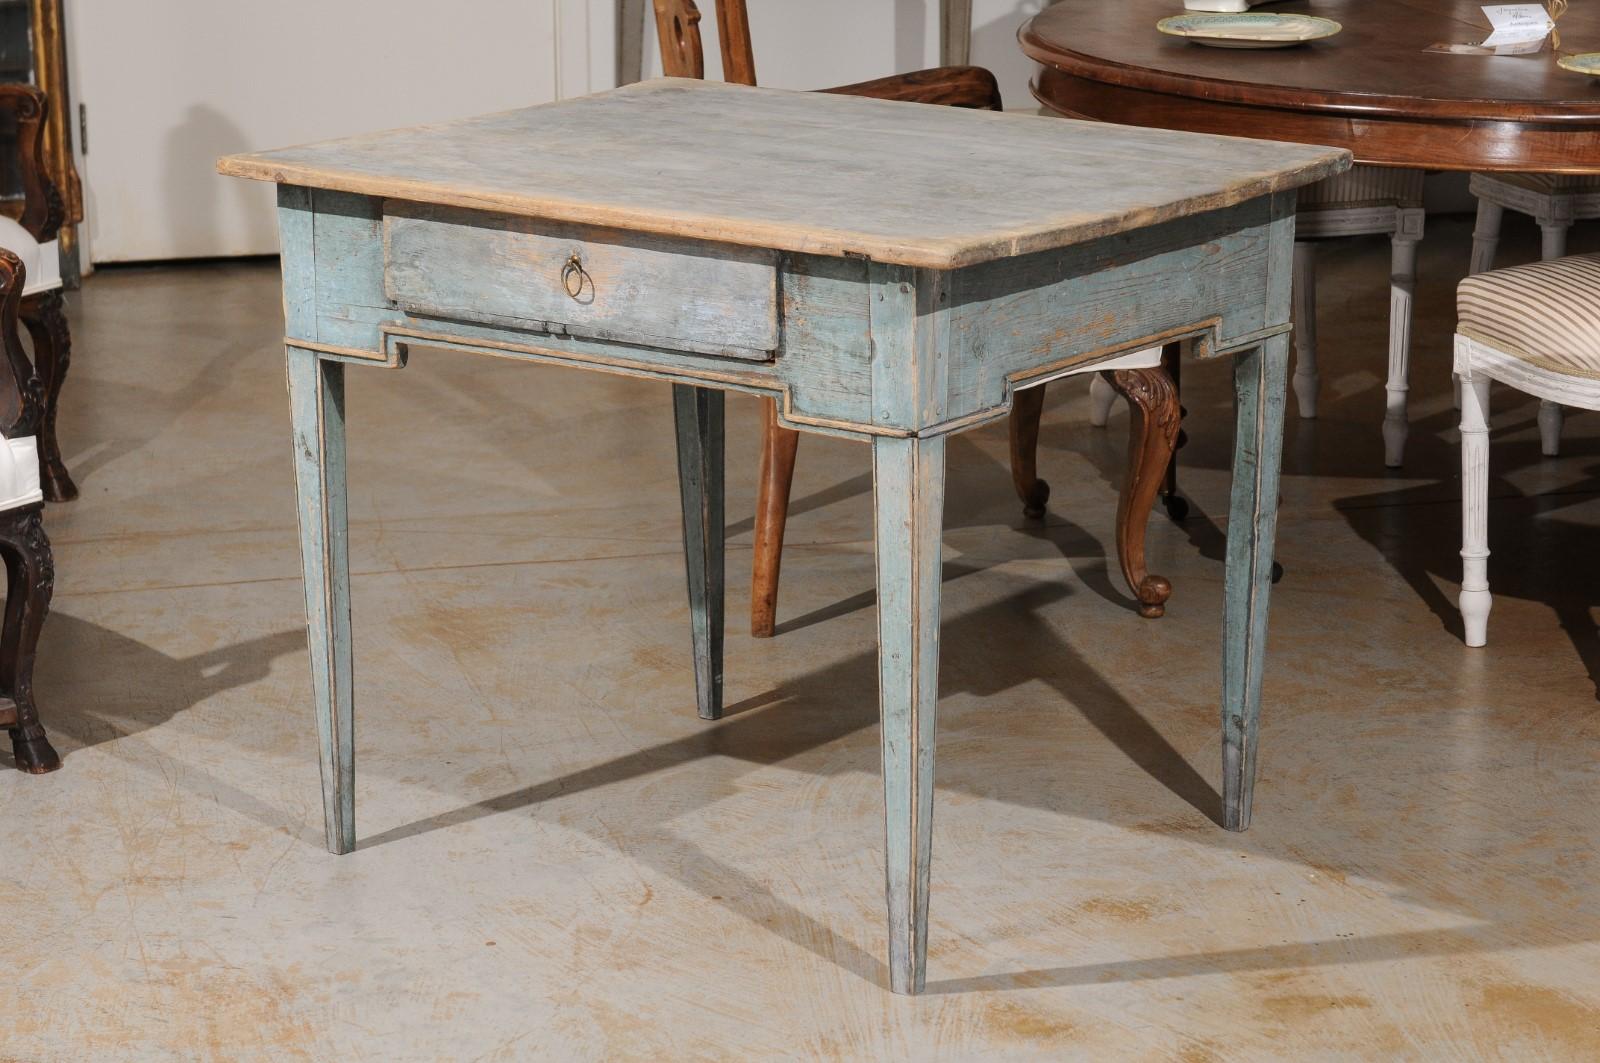 Swedish Provincial 1800s Painted Side Table with Single Drawer and Tapered Legs 8